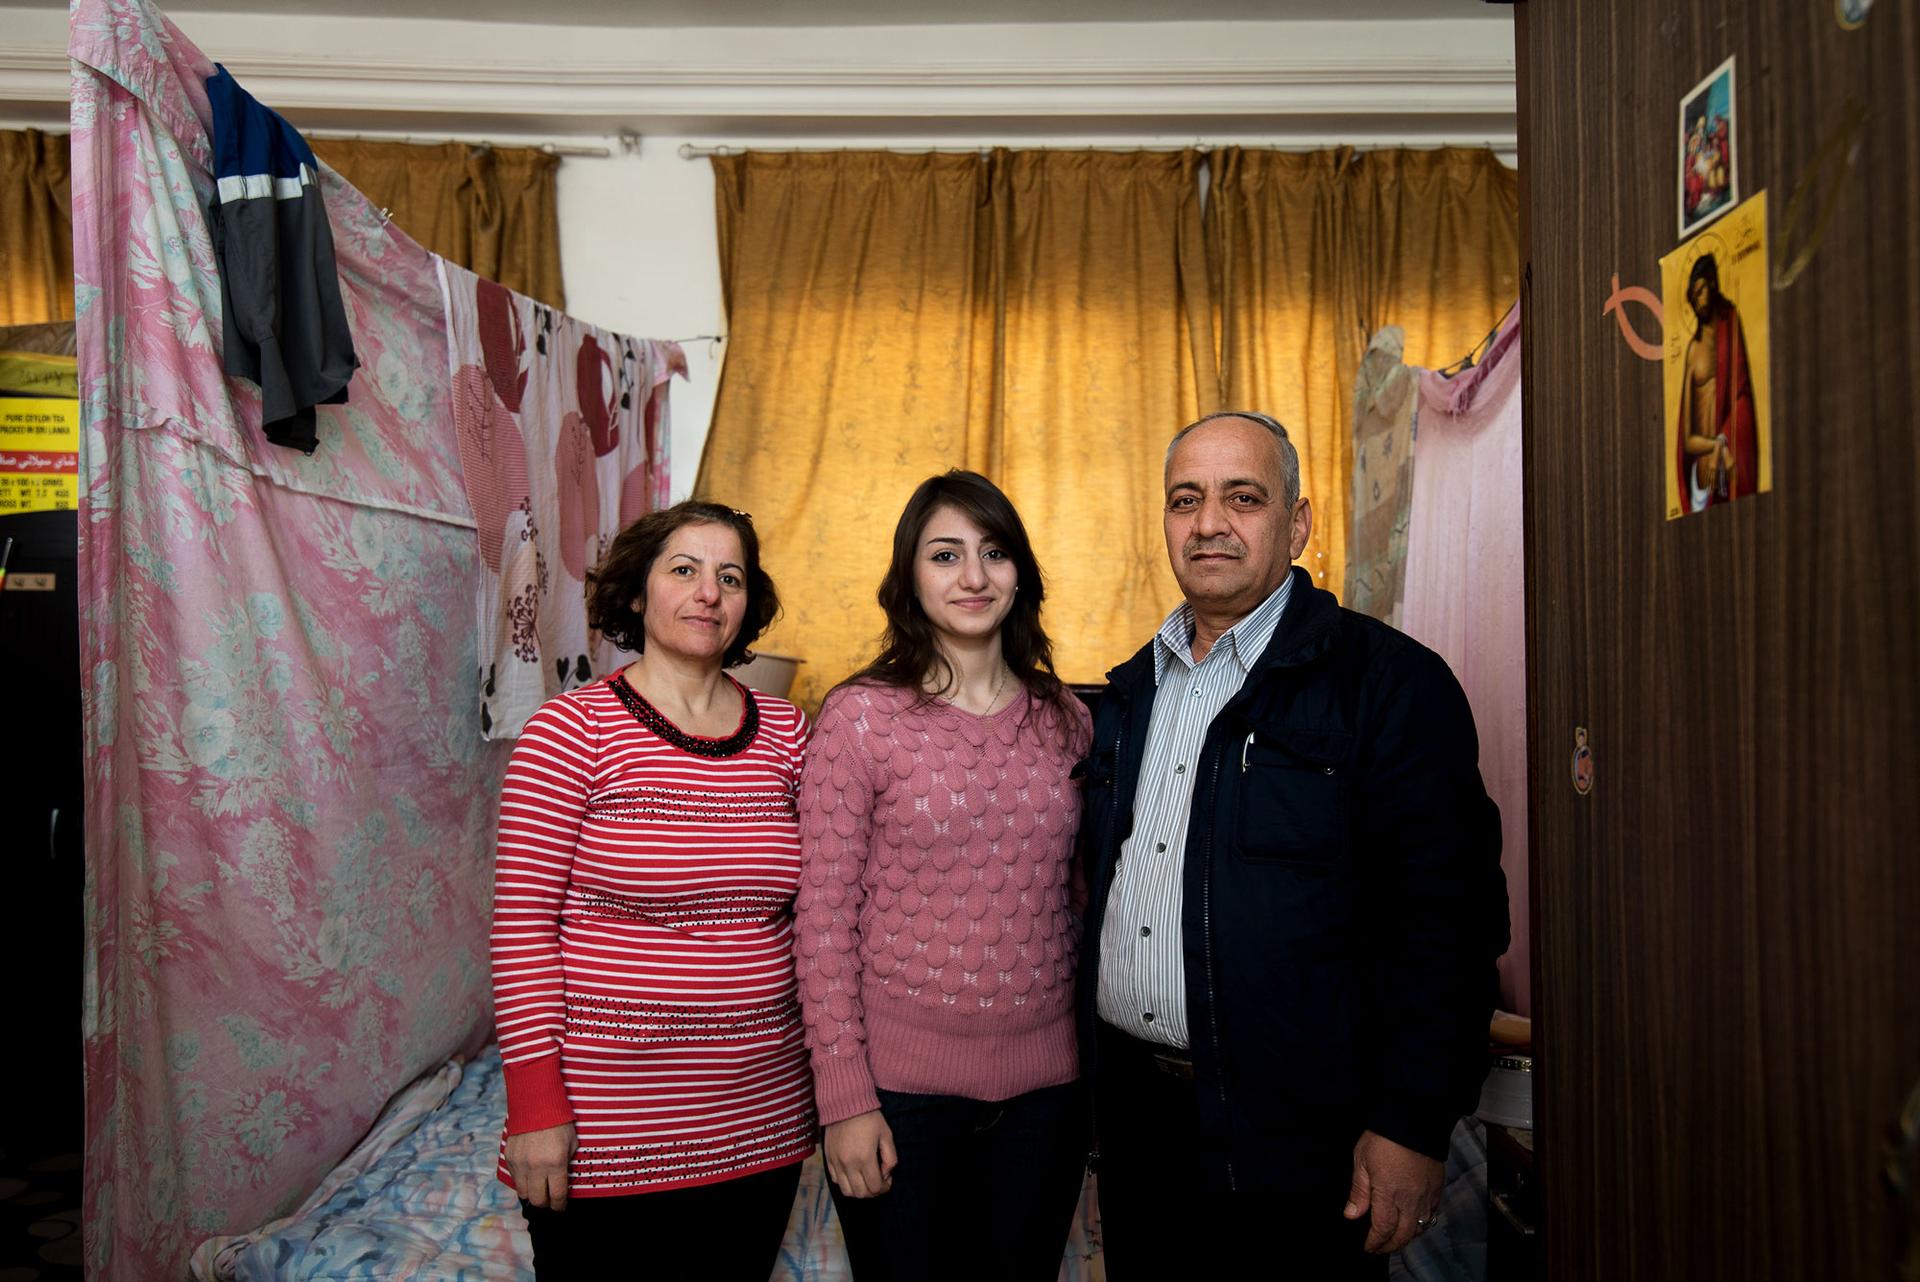 Mosul residents Shatha Gabrail, 50, and Numair Faisal Elyas, 56, pose with their daughter Merna in the curtained-off space in the St. Mary's Church where they've lived for over two years.